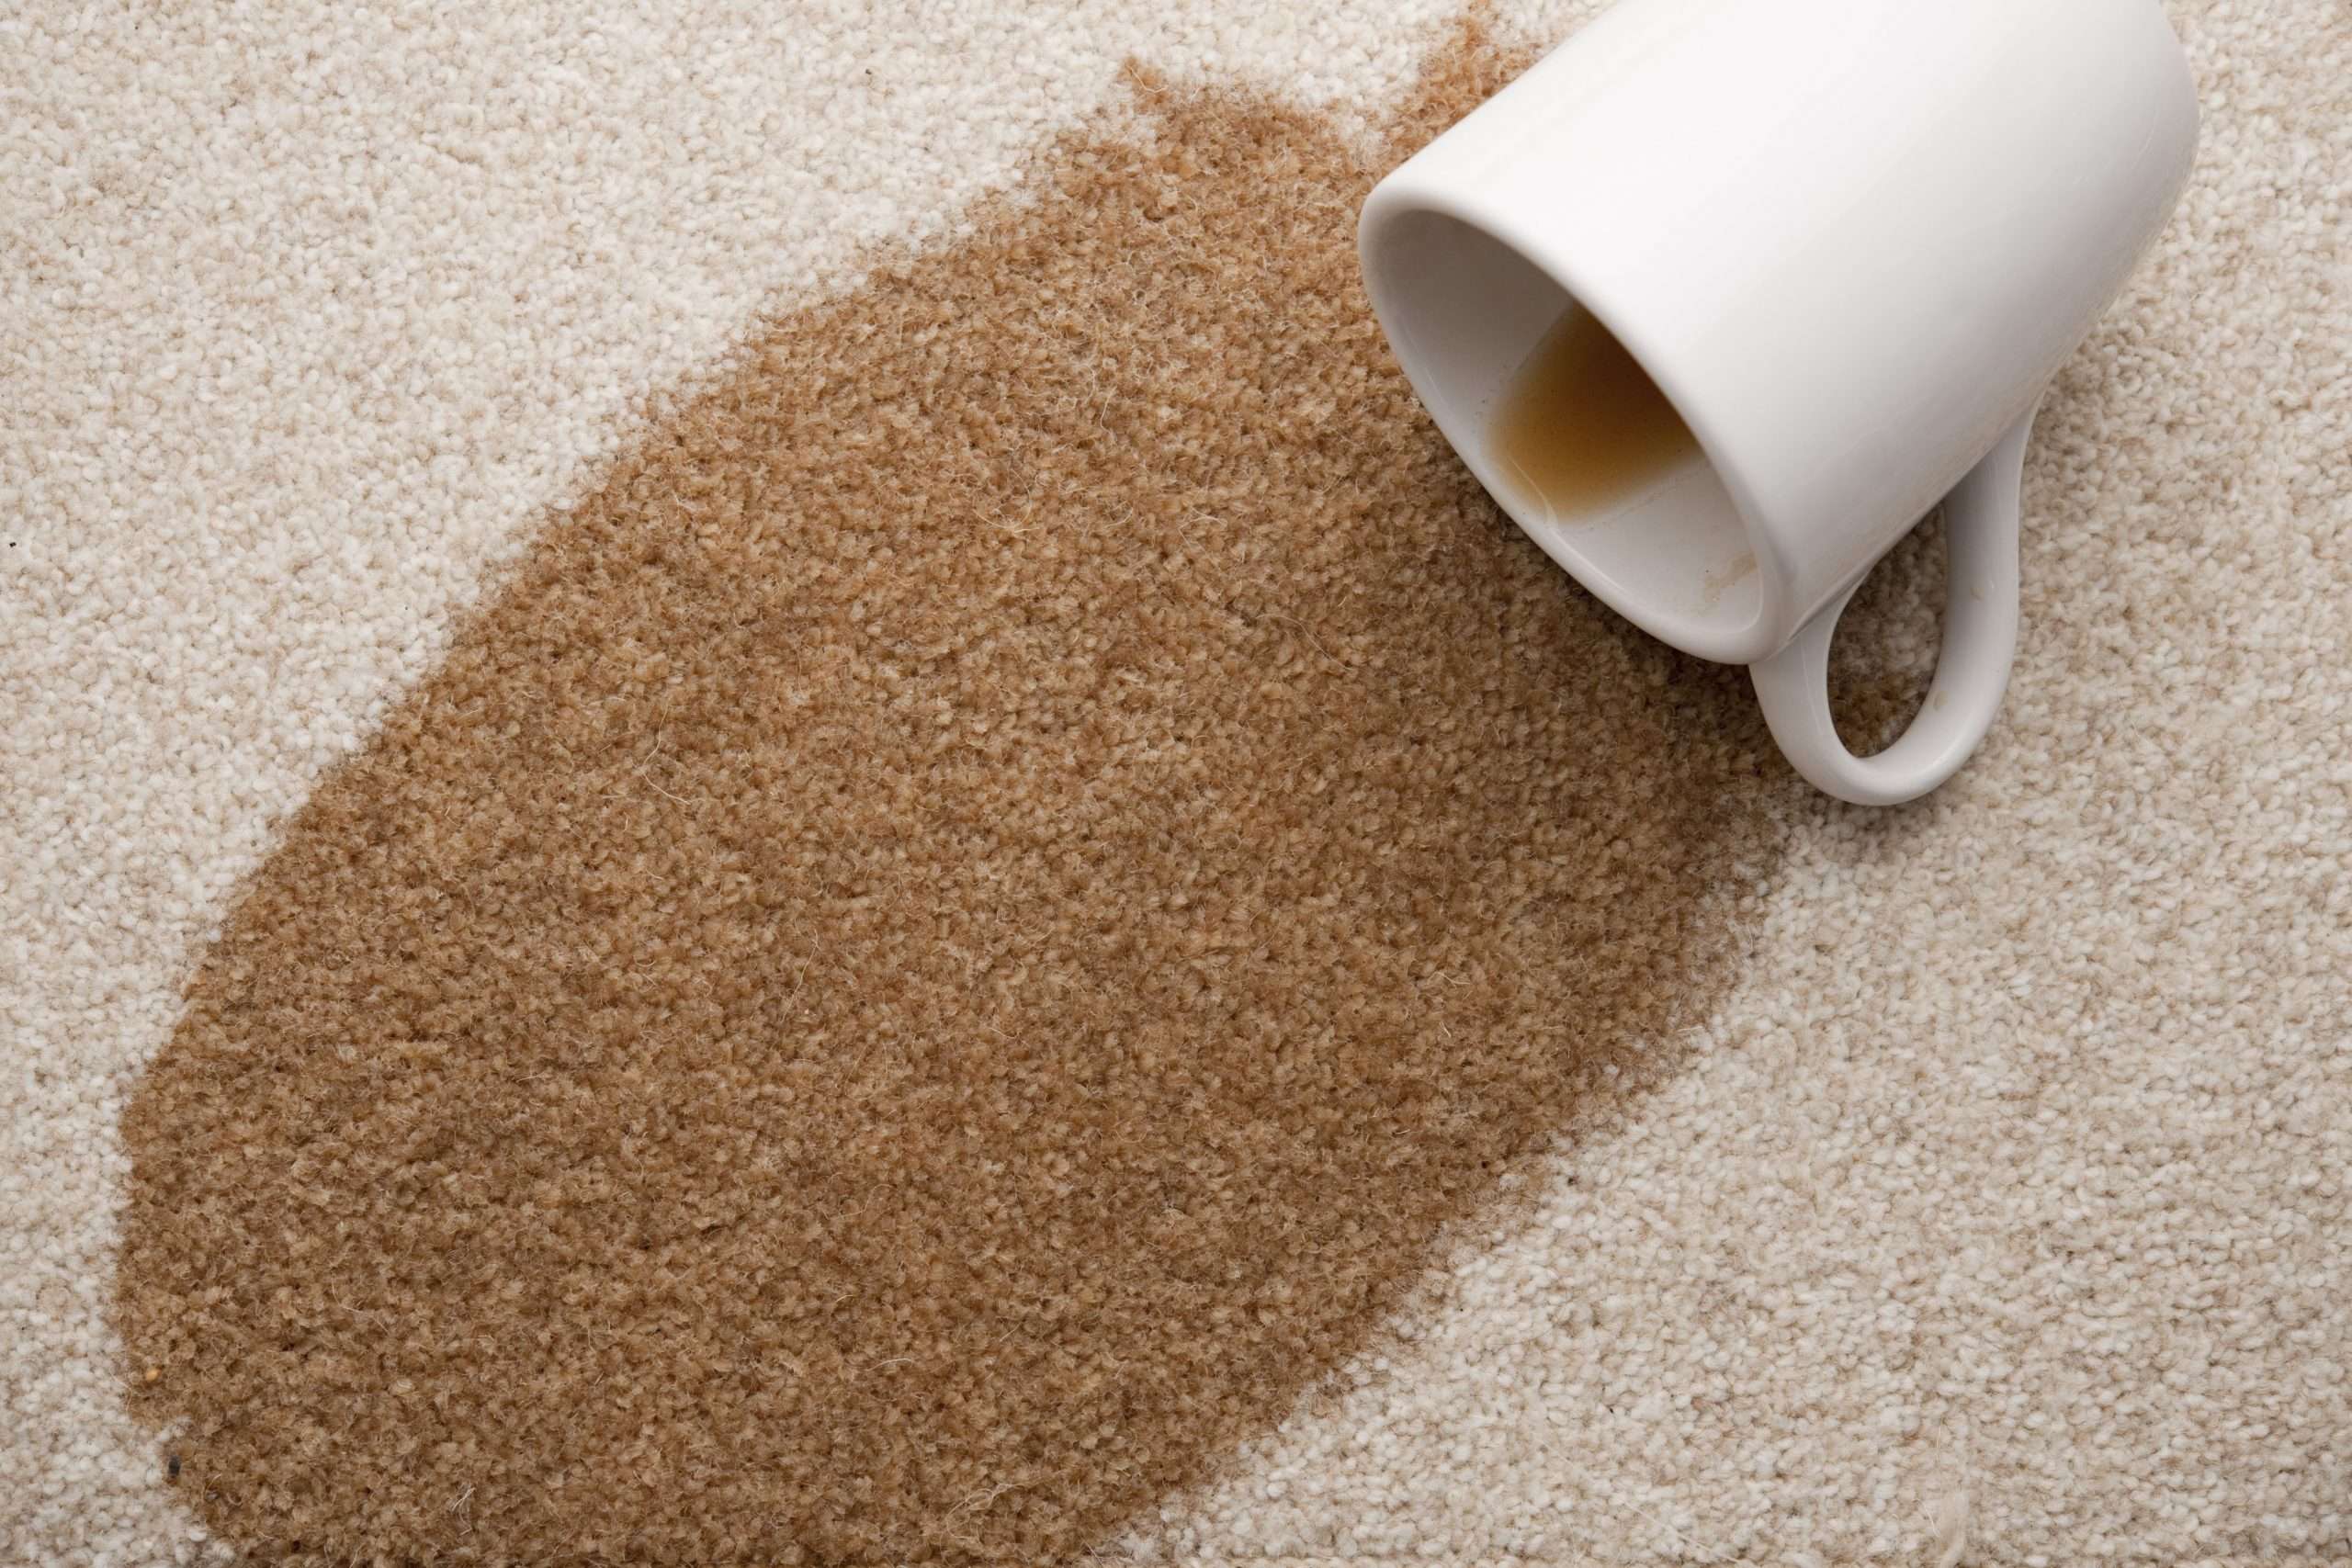 3 Easy Steps to Remove Coffee Stains From Carpet